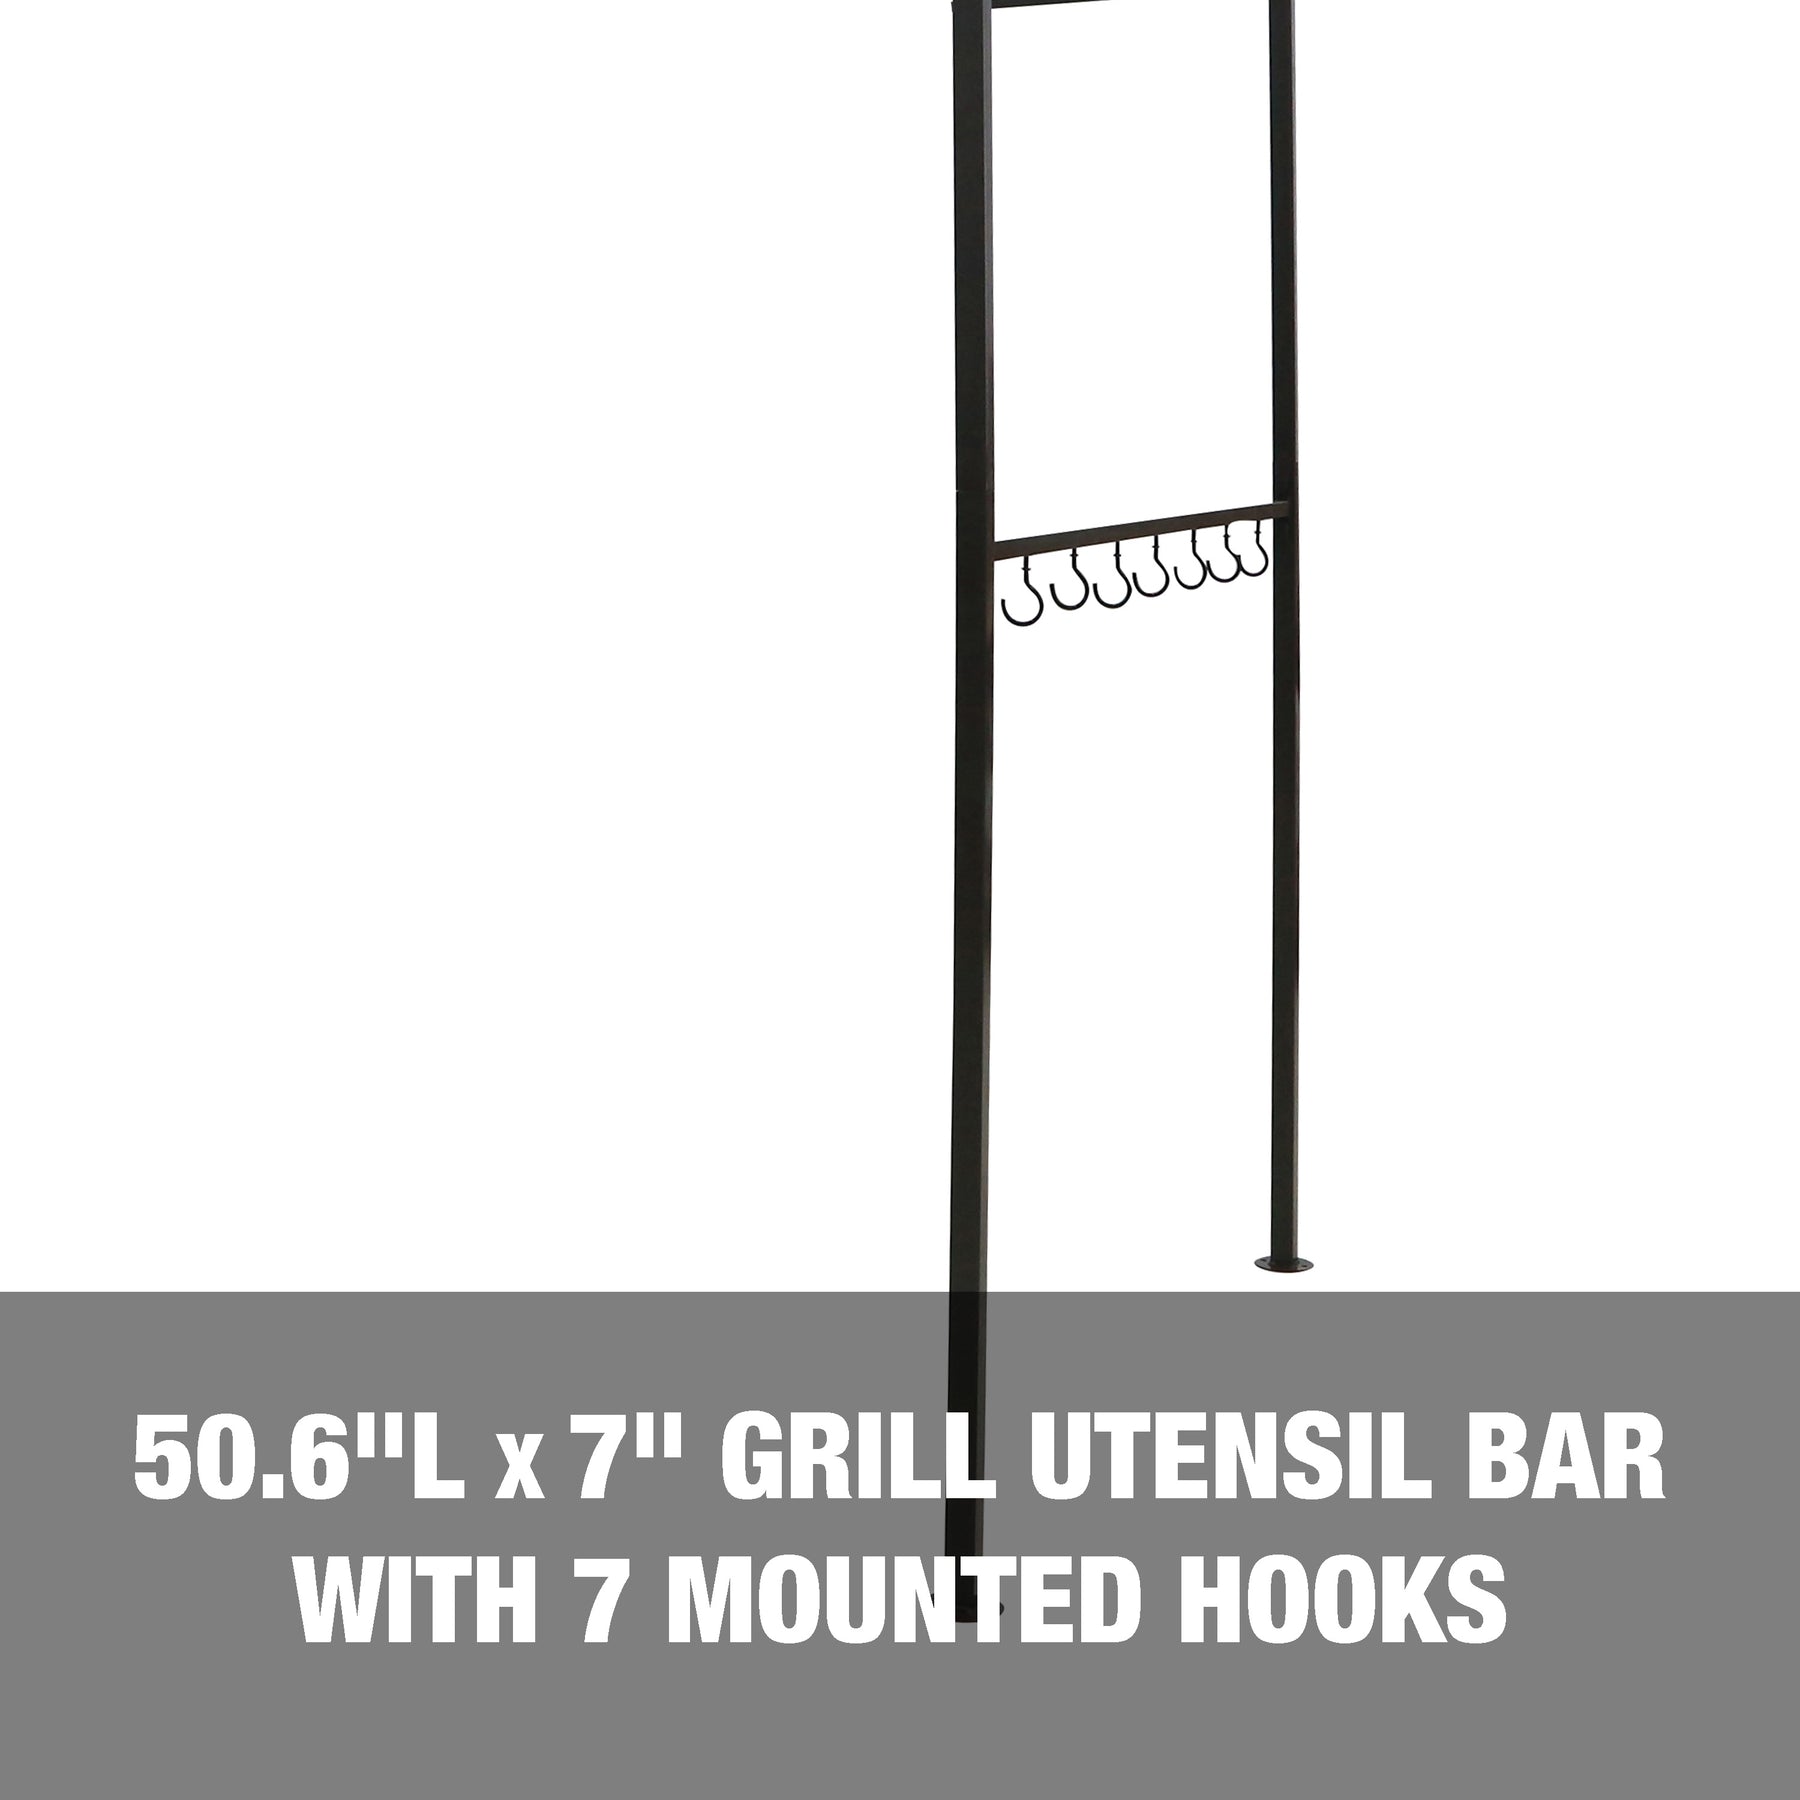 Built-in grill utensil bar with 7 mounted hooks.